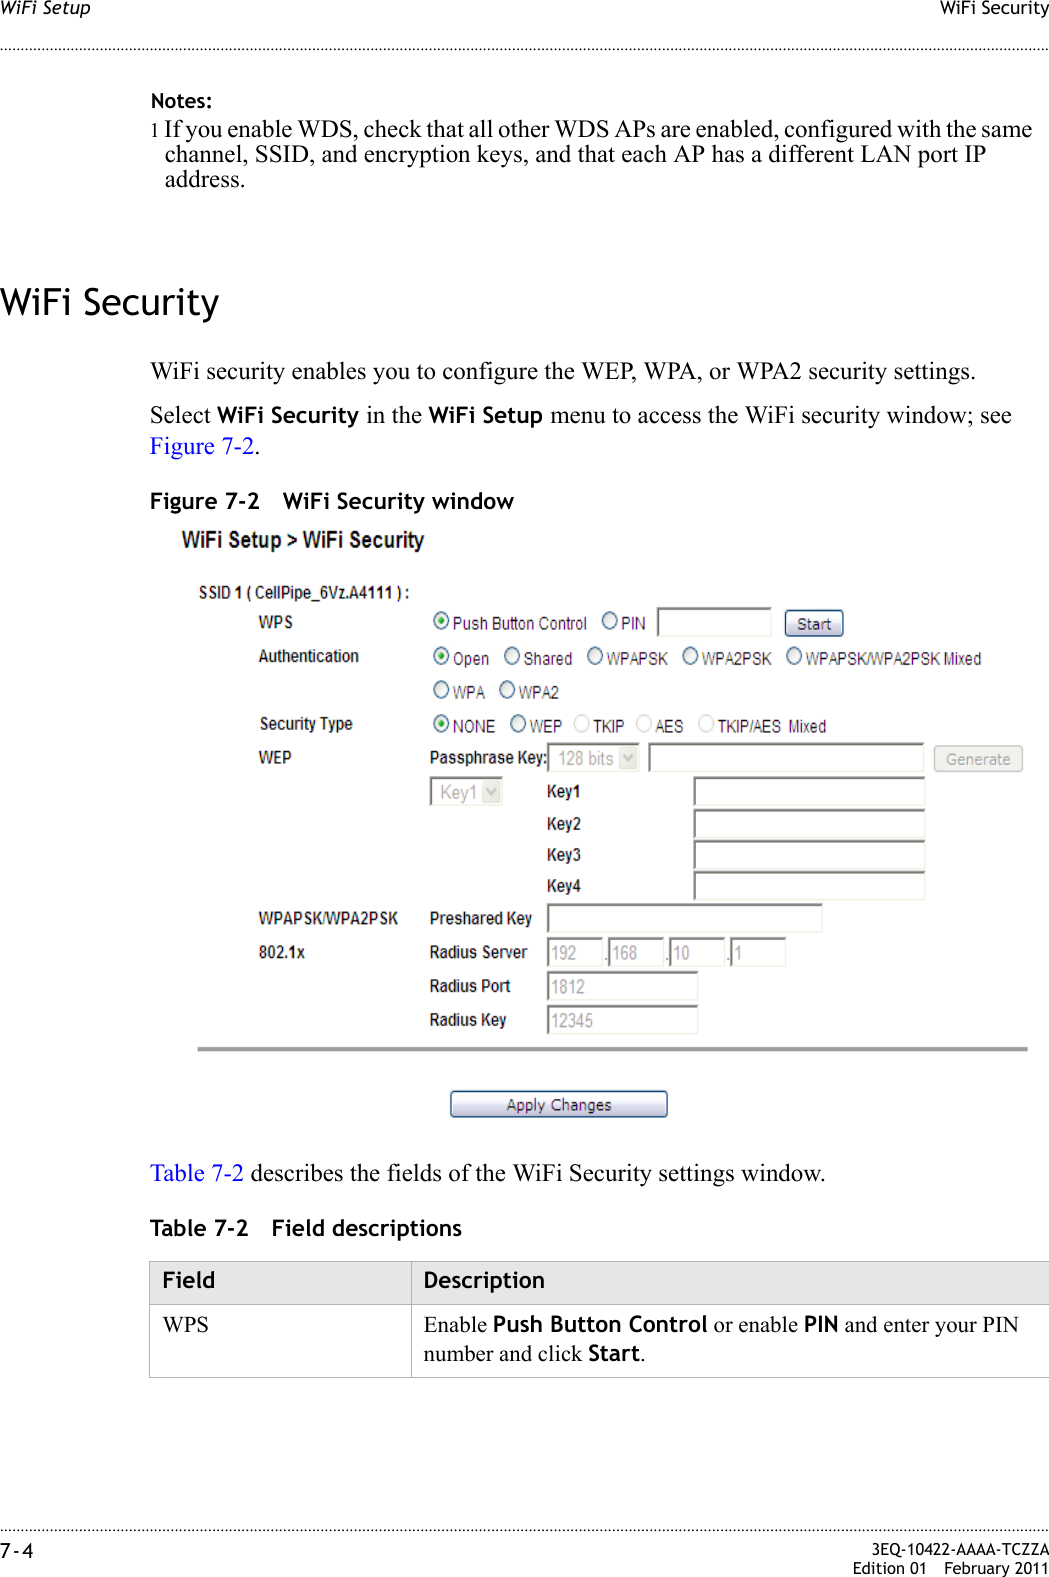 ............................................................................................................................................................................................................................................................WiFi SecurityWiFi Setup7-4  3EQ-10422-AAAA-TCZZAEdition 01 February 2011............................................................................................................................................................................................................................................................WiFi SecurityWiFi security enables you to configure the WEP, WPA, or WPA2 security settings. Select WiFi Security in the WiFi Setup menu to access the WiFi security window; see Figure 7-2.Figure 7-2 WiFi Security windowTable 7-2 describes the fields of the WiFi Security settings window.Table 7-2 Field descriptionsNotes:1 If you enable WDS, check that all other WDS APs are enabled, configured with the same channel, SSID, and encryption keys, and that each AP has a different LAN port IP address.Field DescriptionWPS Enable Push Button Control or enable PIN and enter your PIN number and click Start. 